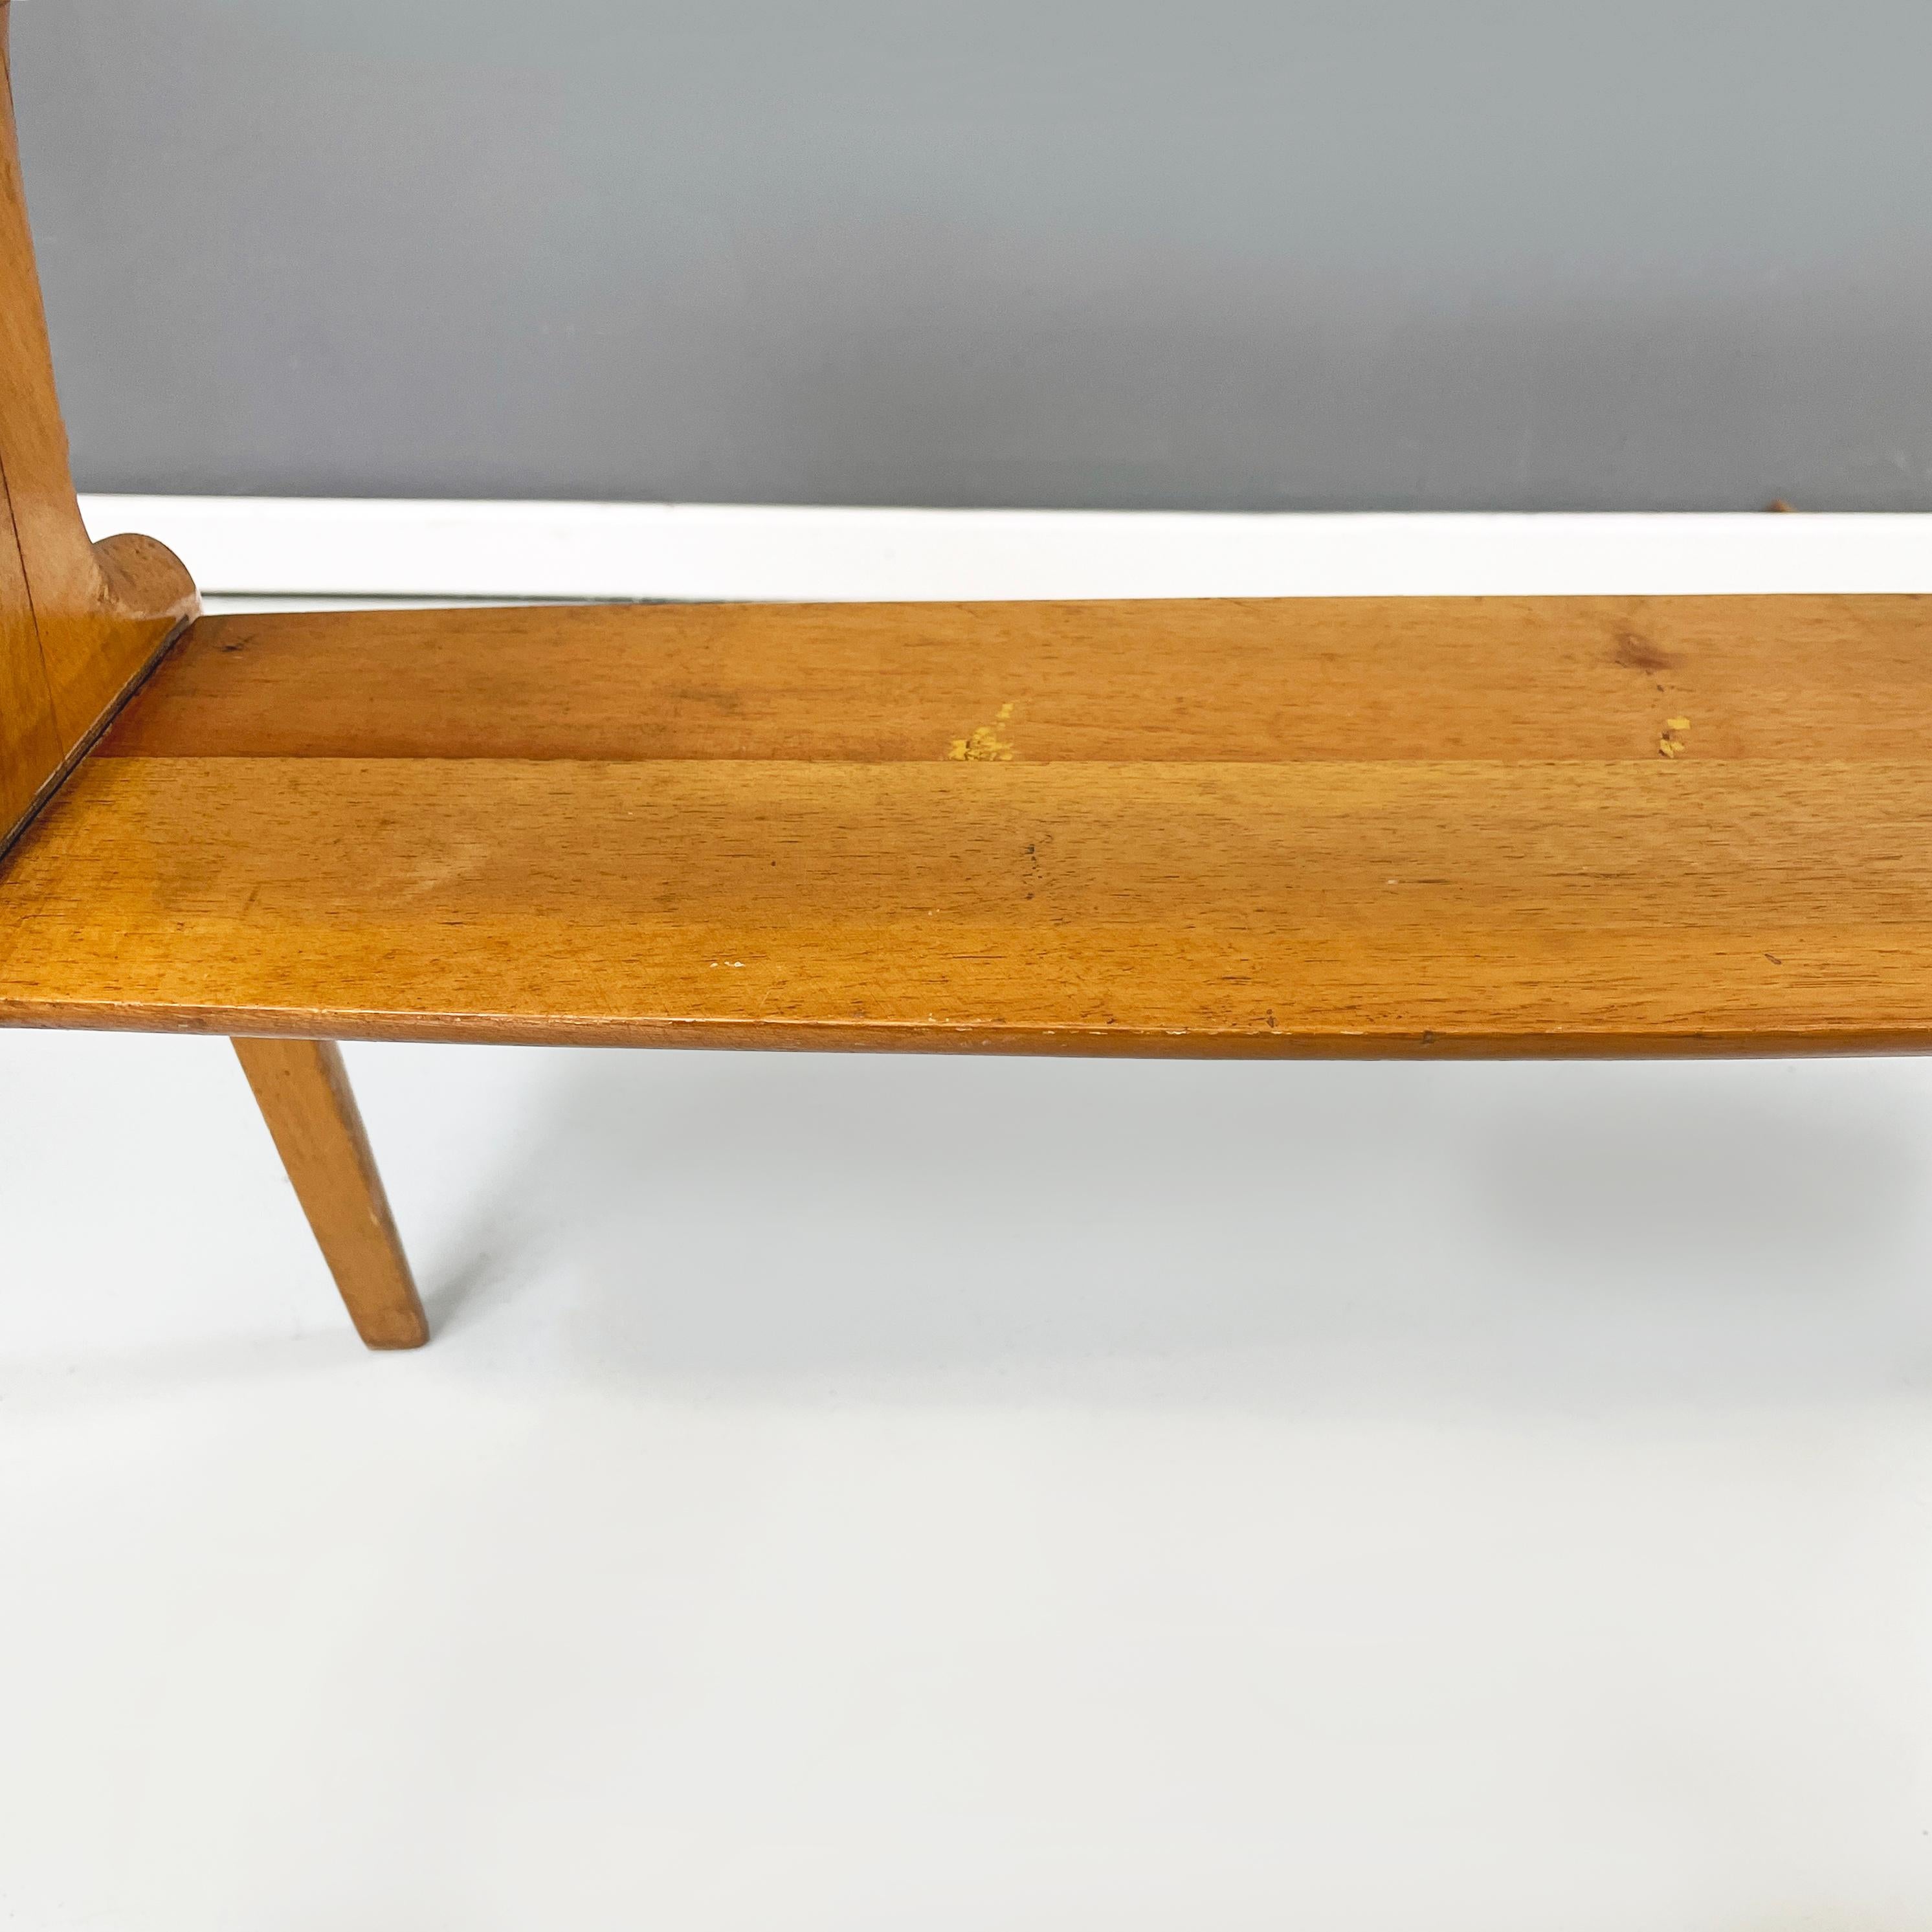 Italian mid-century modern Coffee table in wood and decorated glass, 1950s For Sale 6